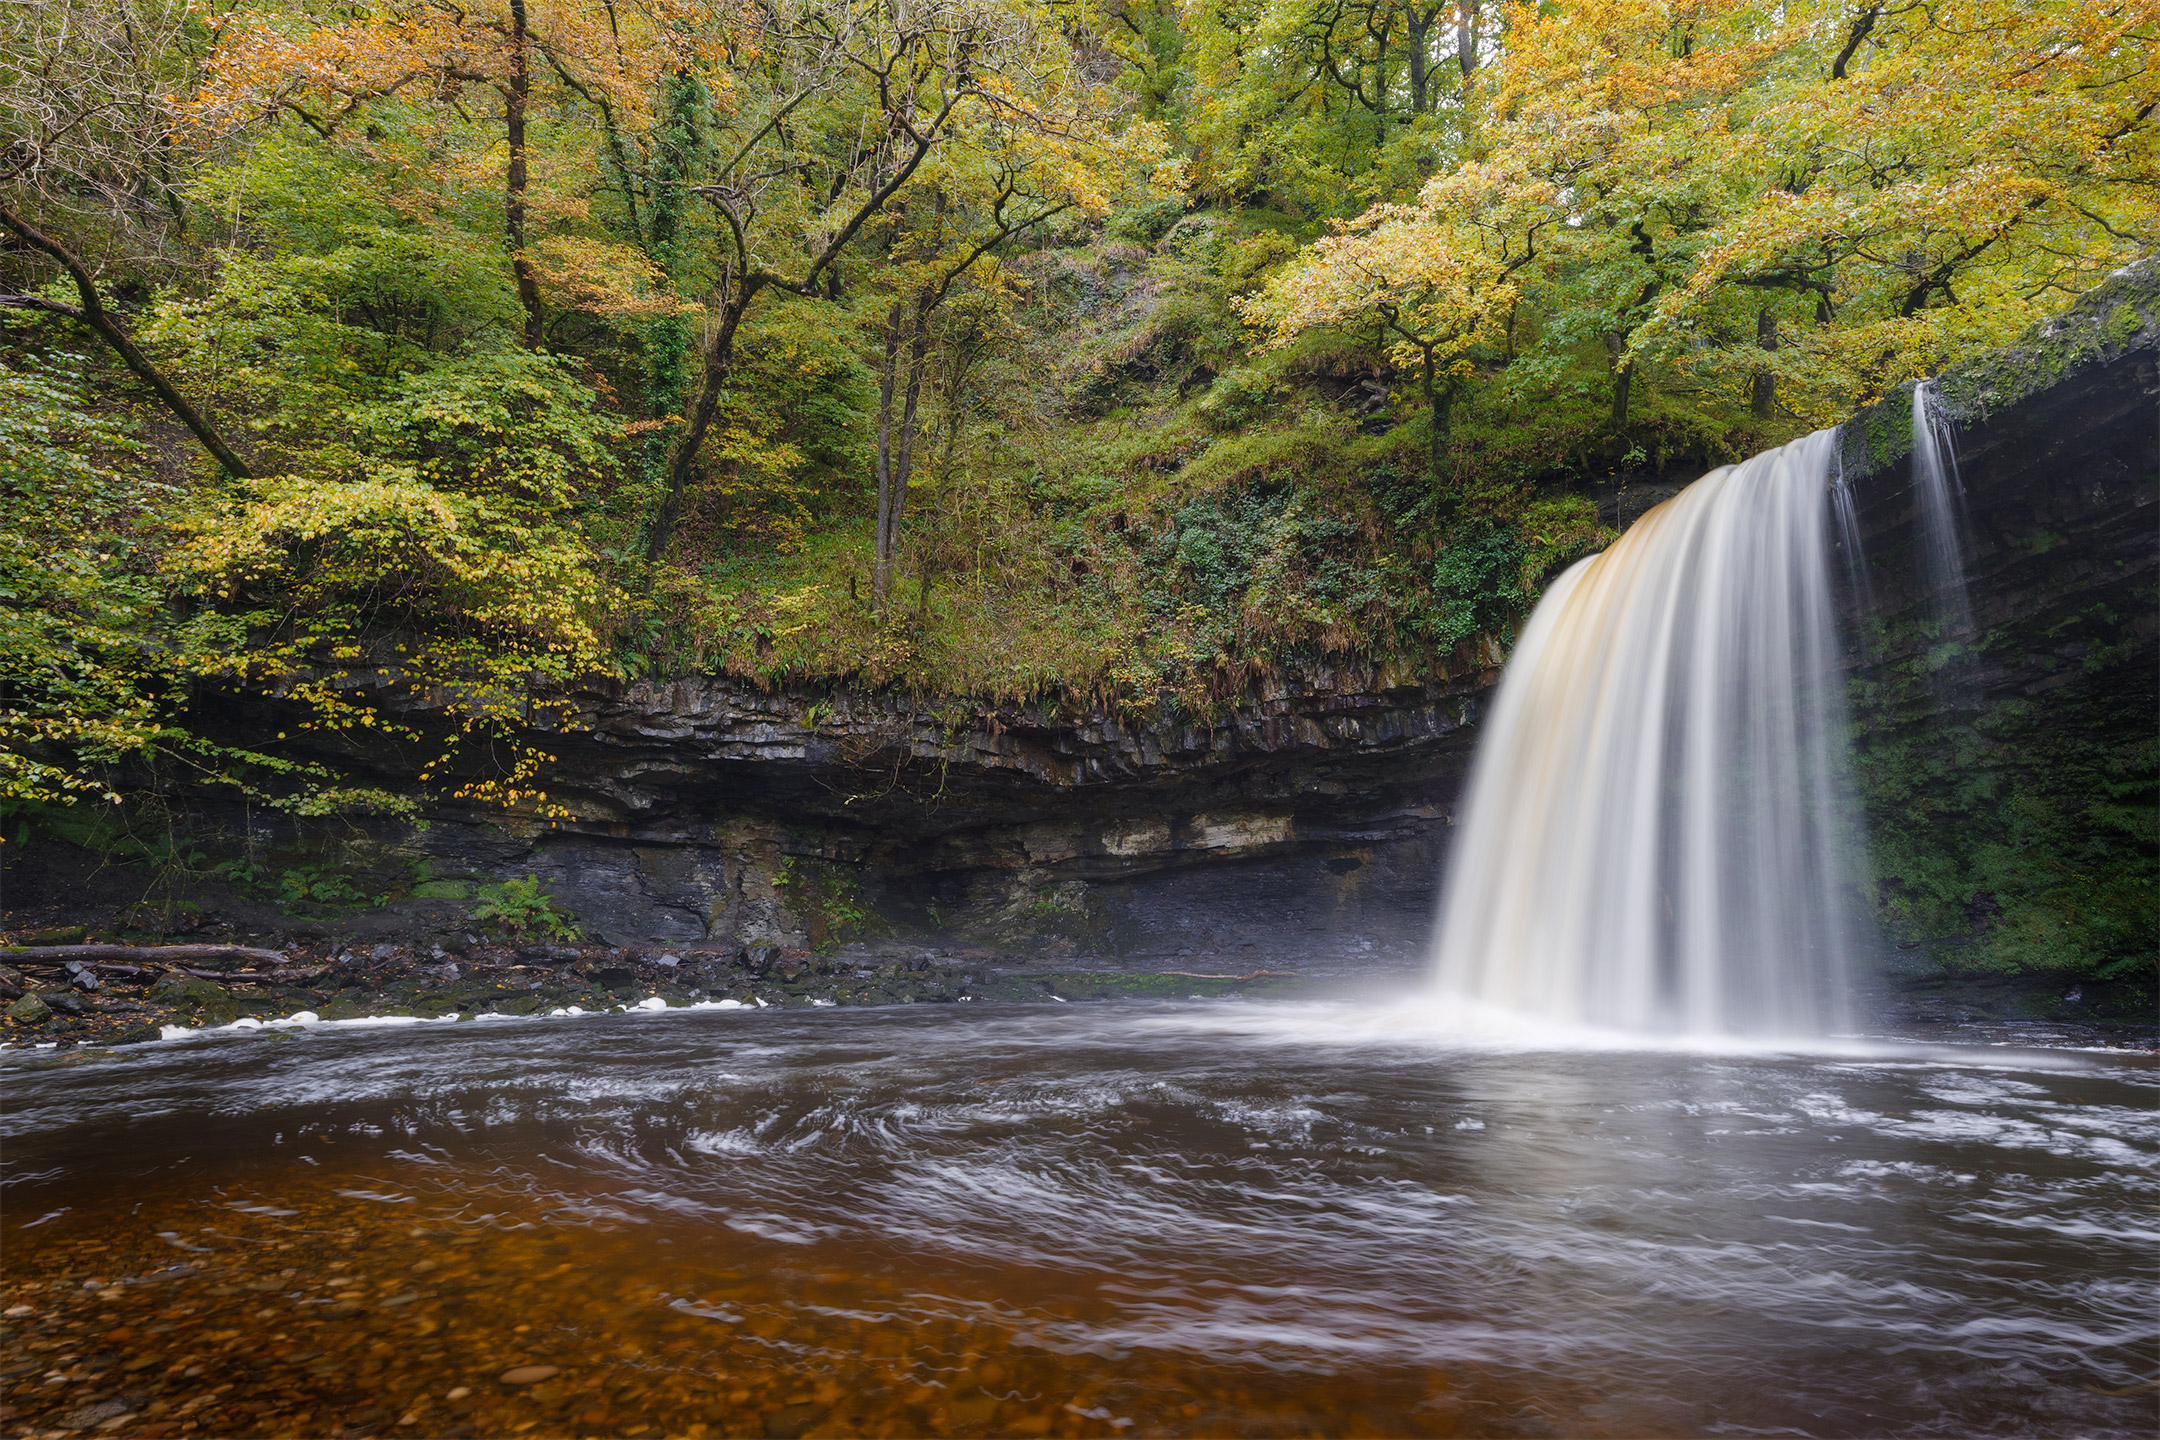 Autumn trees overlook the pool created by Sgwd Gwladys in the Brecon Beacons, Wales